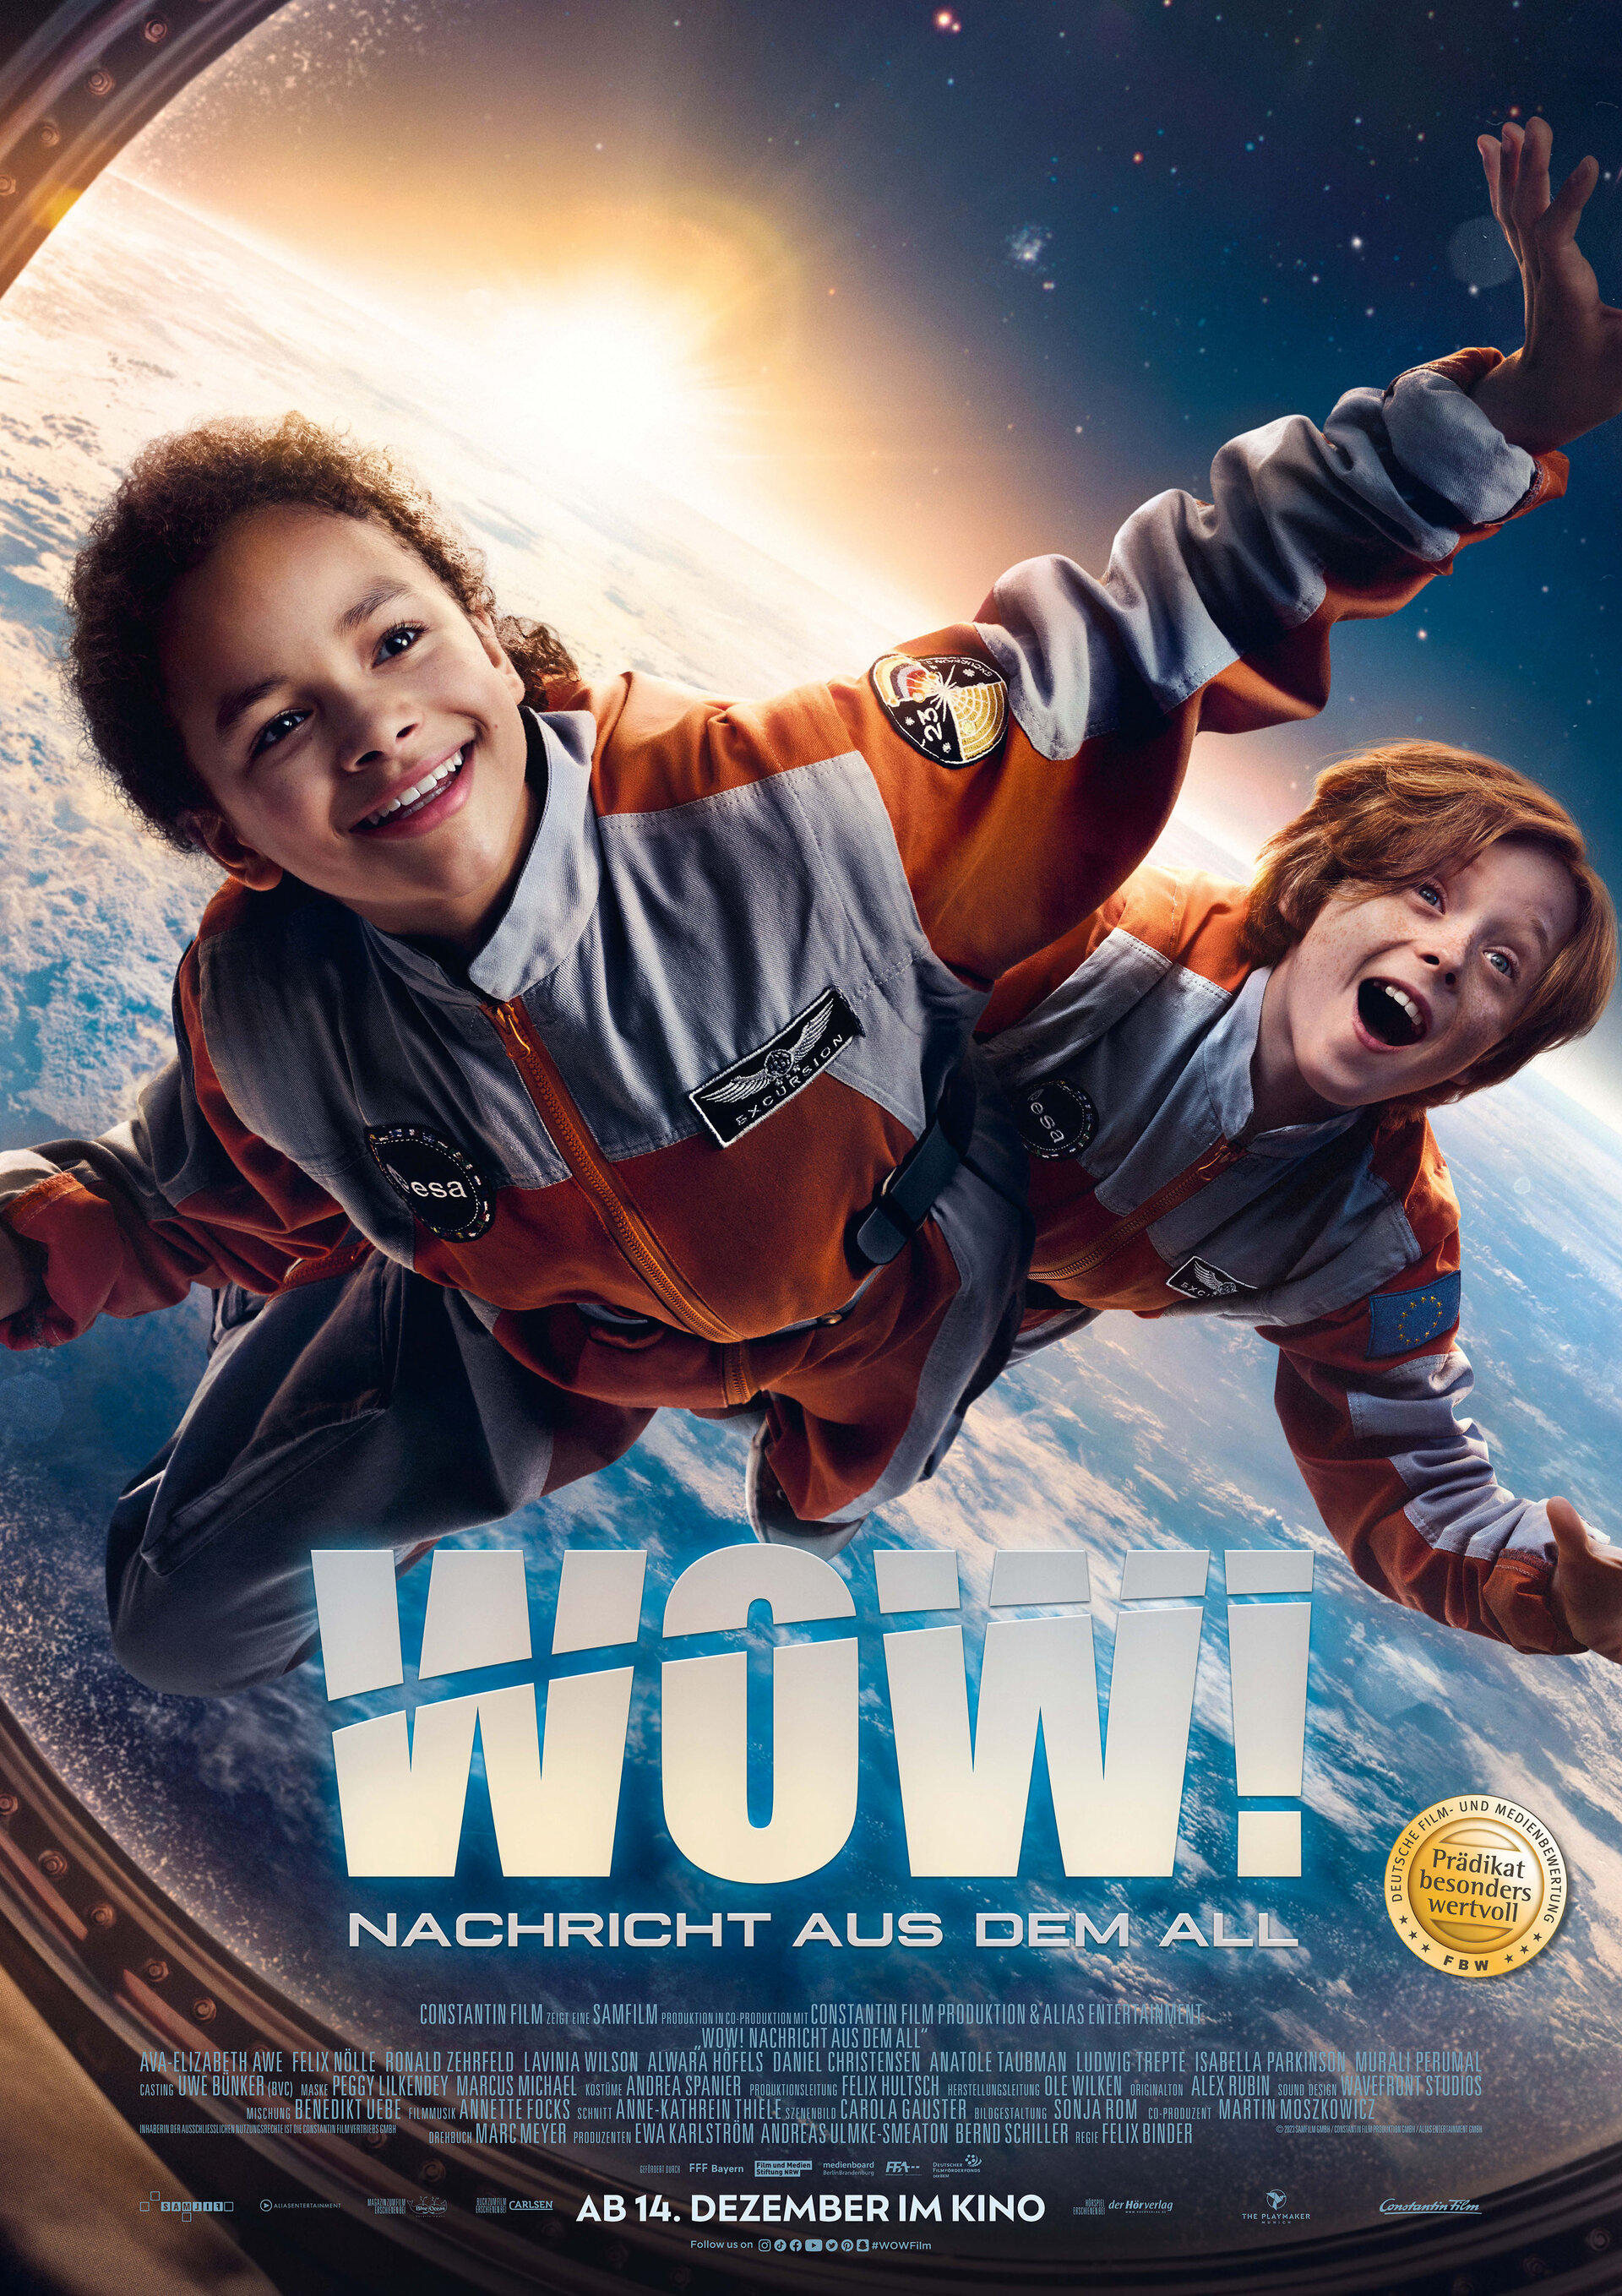 Movie poster for Wow! Message from Outer Space (Wow! Nachricht Aus Dem All).